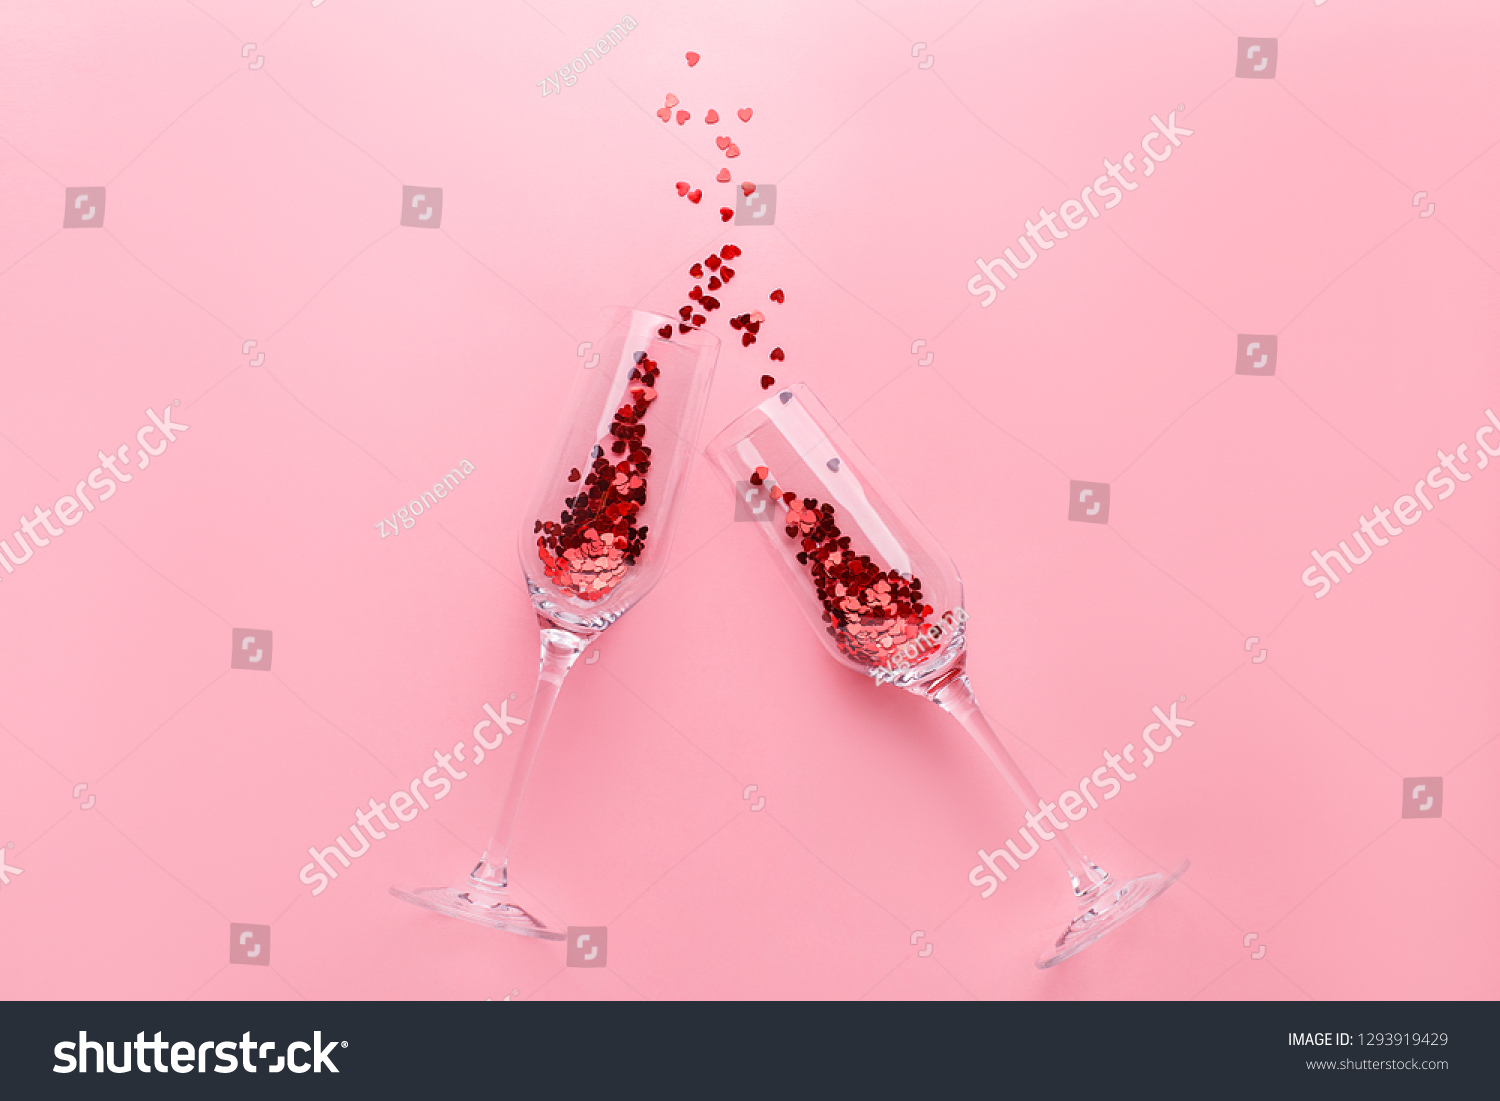 Two clinking champagne glasses with splash of red heart shaped confetti over pink background. Overhead view, copy space. Valentine's Day concept #1293919429